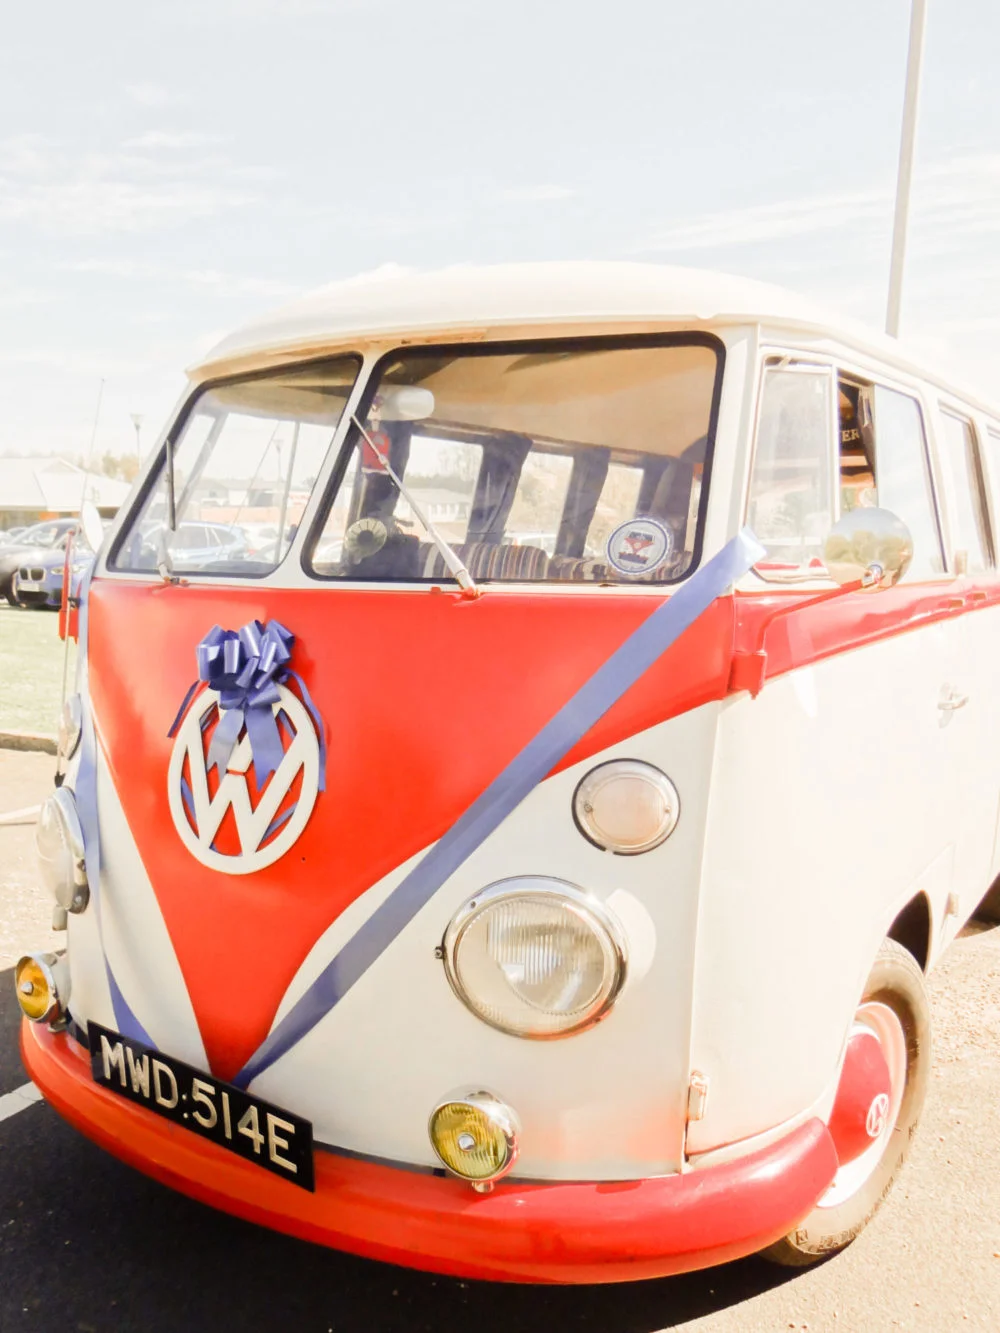 VW Wedding Car hire with blue ribbons and bows